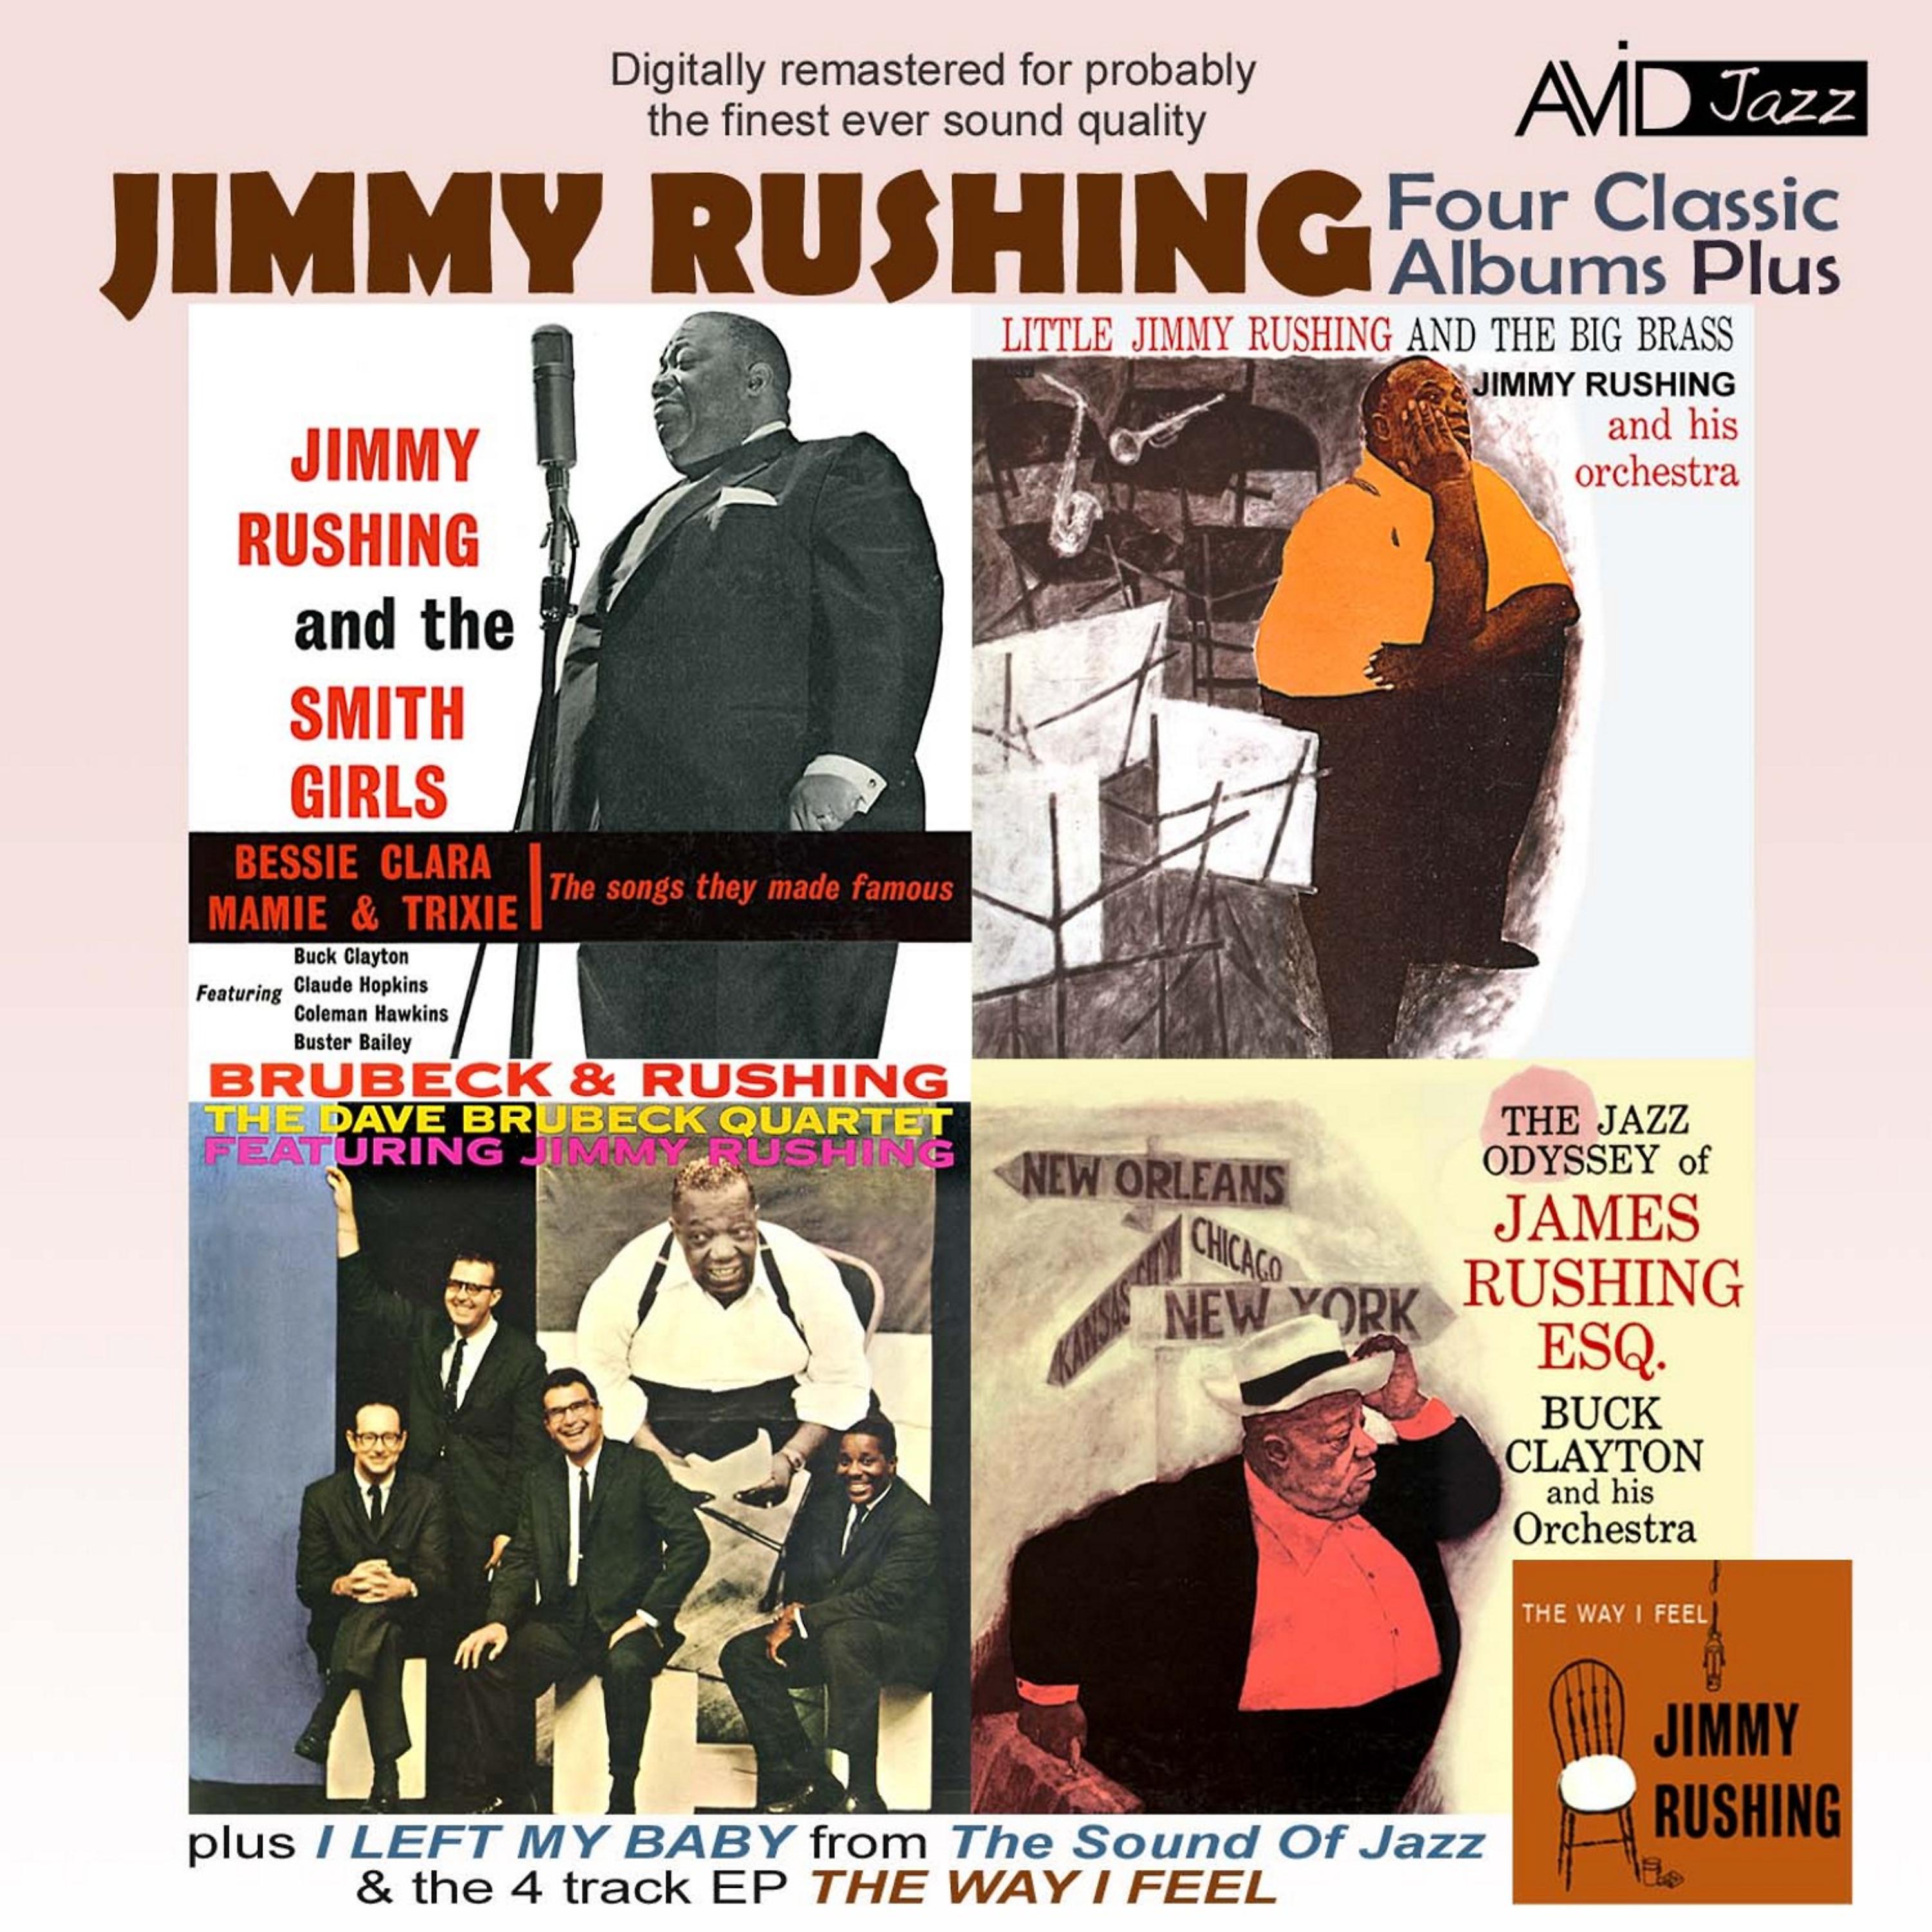 Постер альбома Four Classic Albums Plus (Jimmy Rushing and The Smith Girls / The Jazz Odyssey of James Rushing Esq / Little Jimmy Rushing and The Big Brass / Brubeck & Rushing) [Remastered]